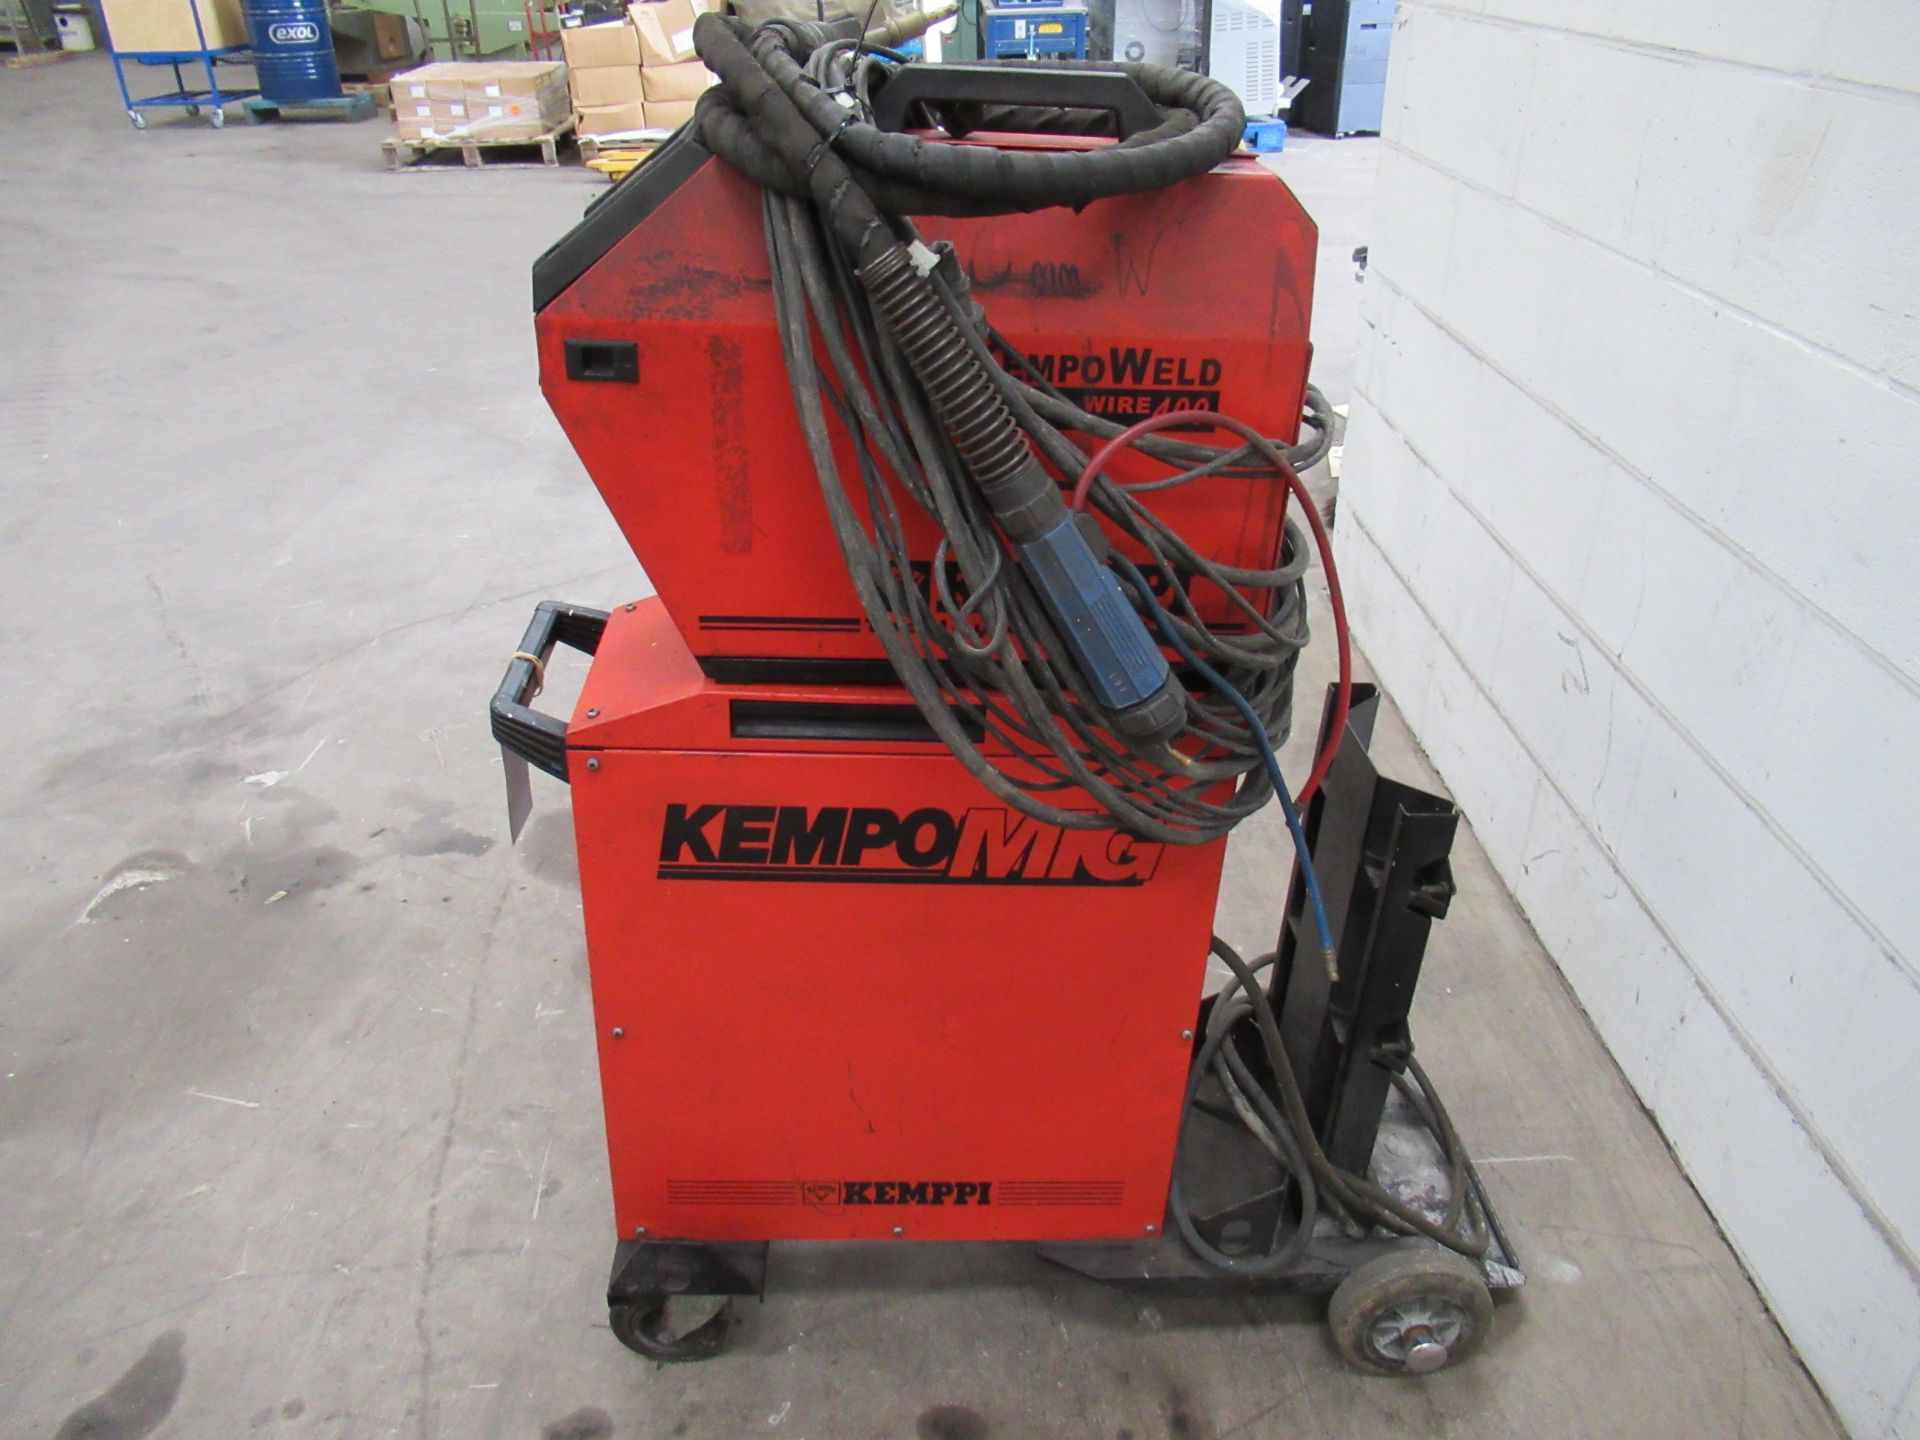 Kemppi Kempomig 4000 and Kemppi Kempoweld wire 400 MiG welder including wire feed, torch, and leads - Image 3 of 10